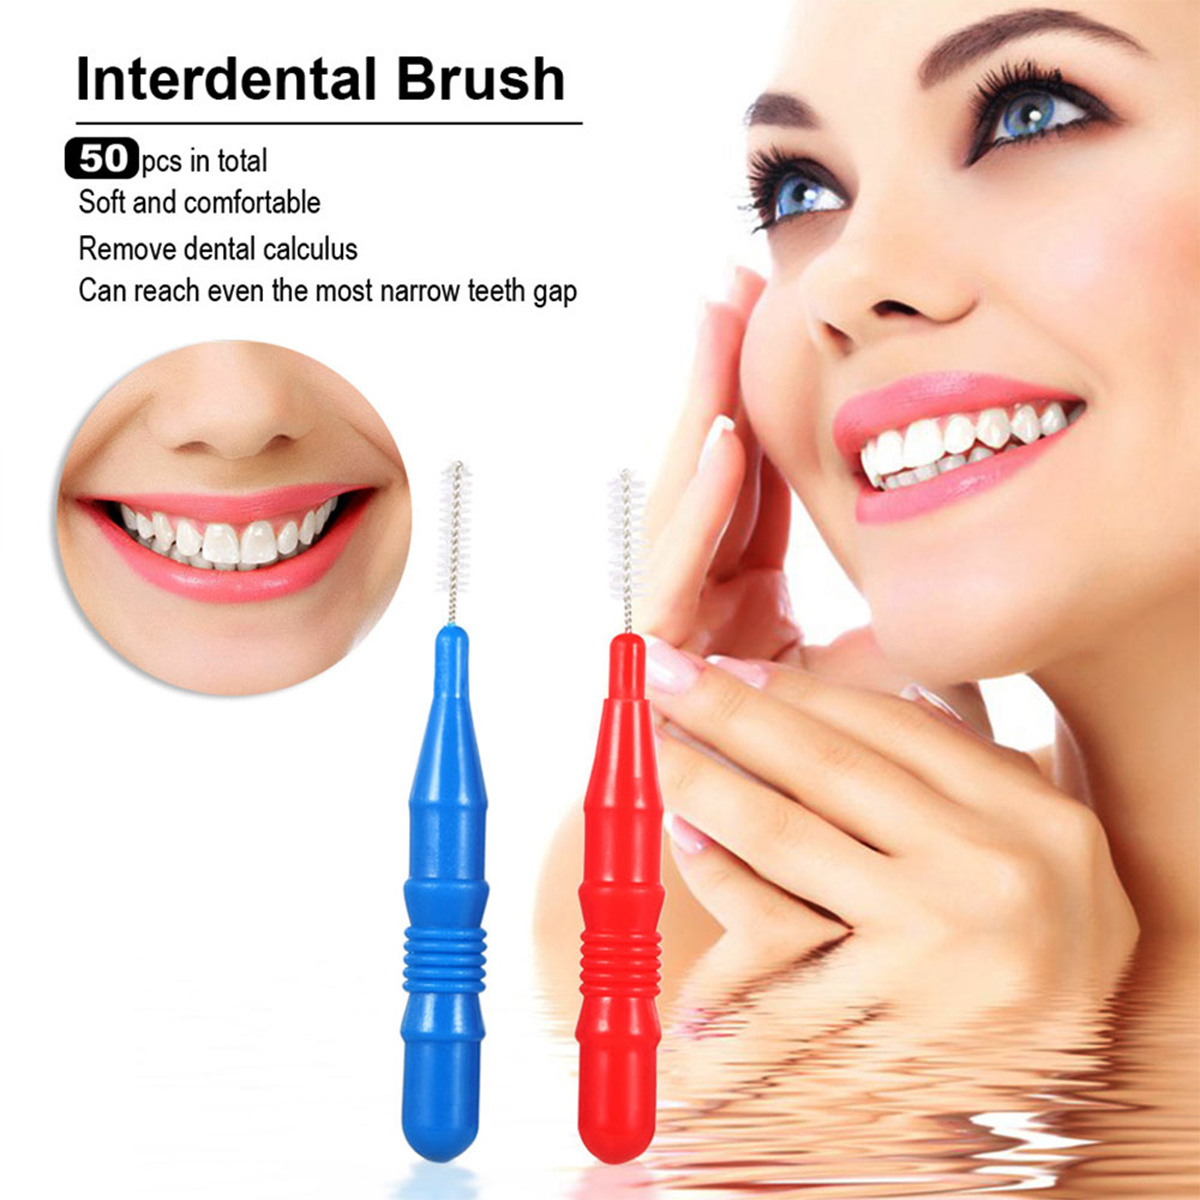 50pcs soft comfortable interdental brushes for oral floss teeth care details 5